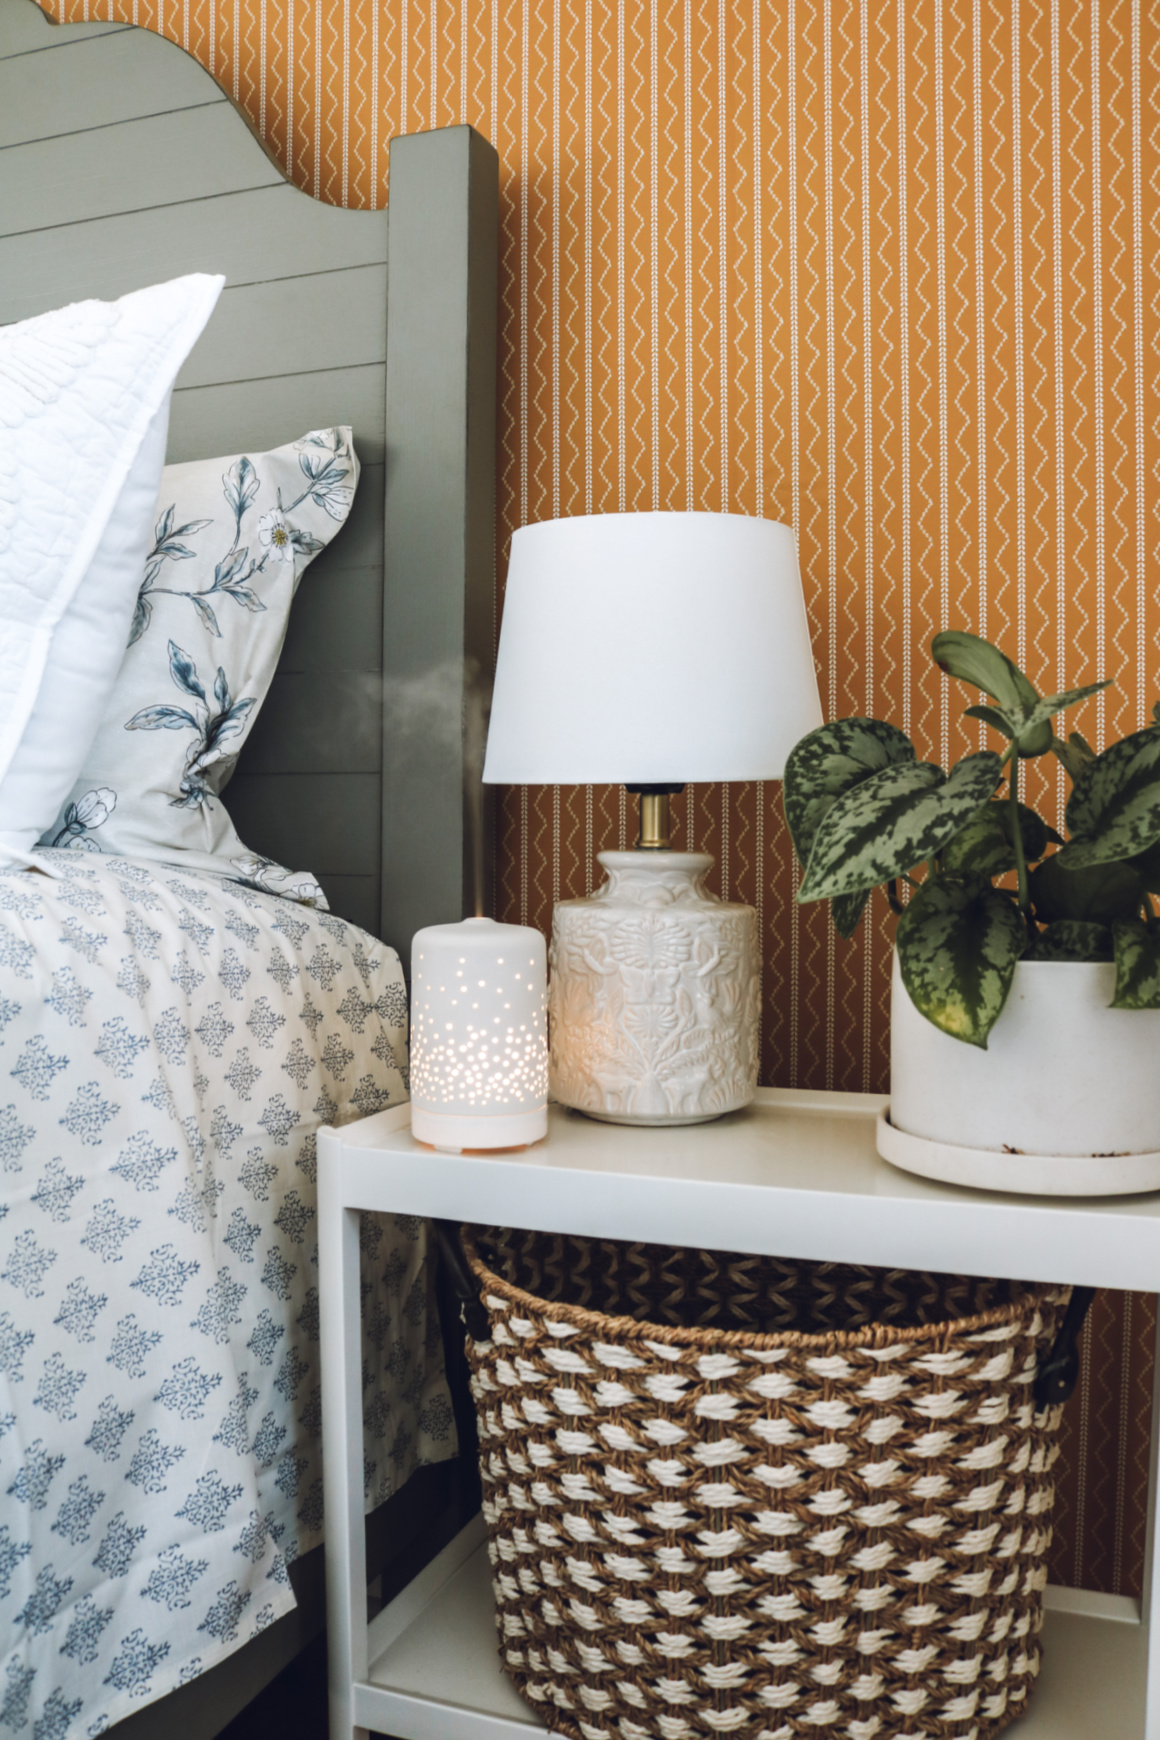 7 Things Every Guest Room Needs